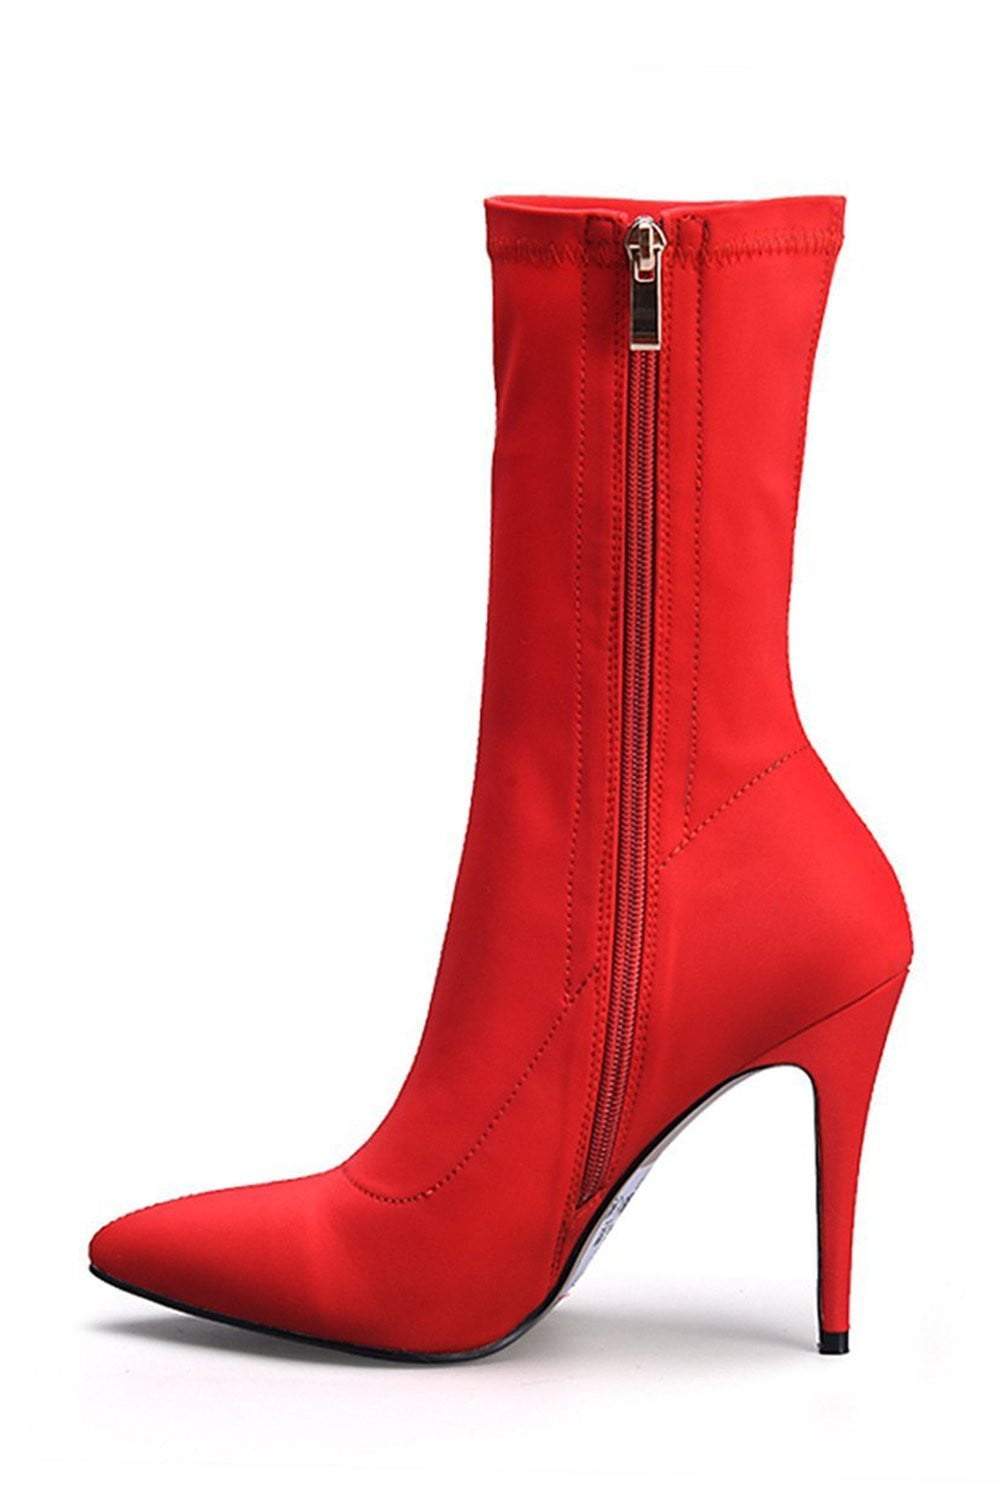 Red Satin Bow Stiletto Heel Ankle Boots|FSJshoes